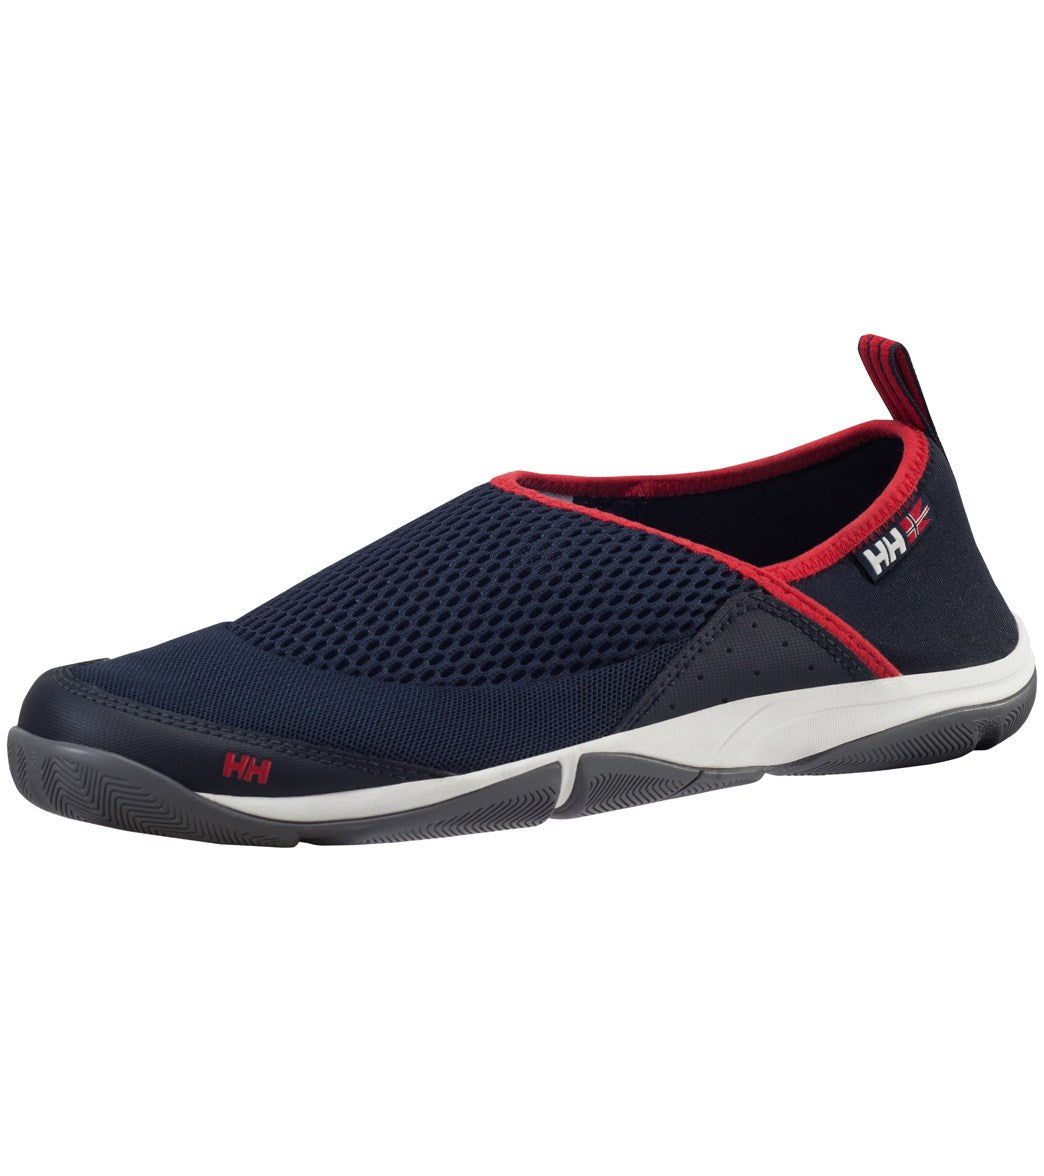 Helly Hansen Men's Watermoc 2 Water Shoes - Navy/Red 7.5 - Swimoutlet.com